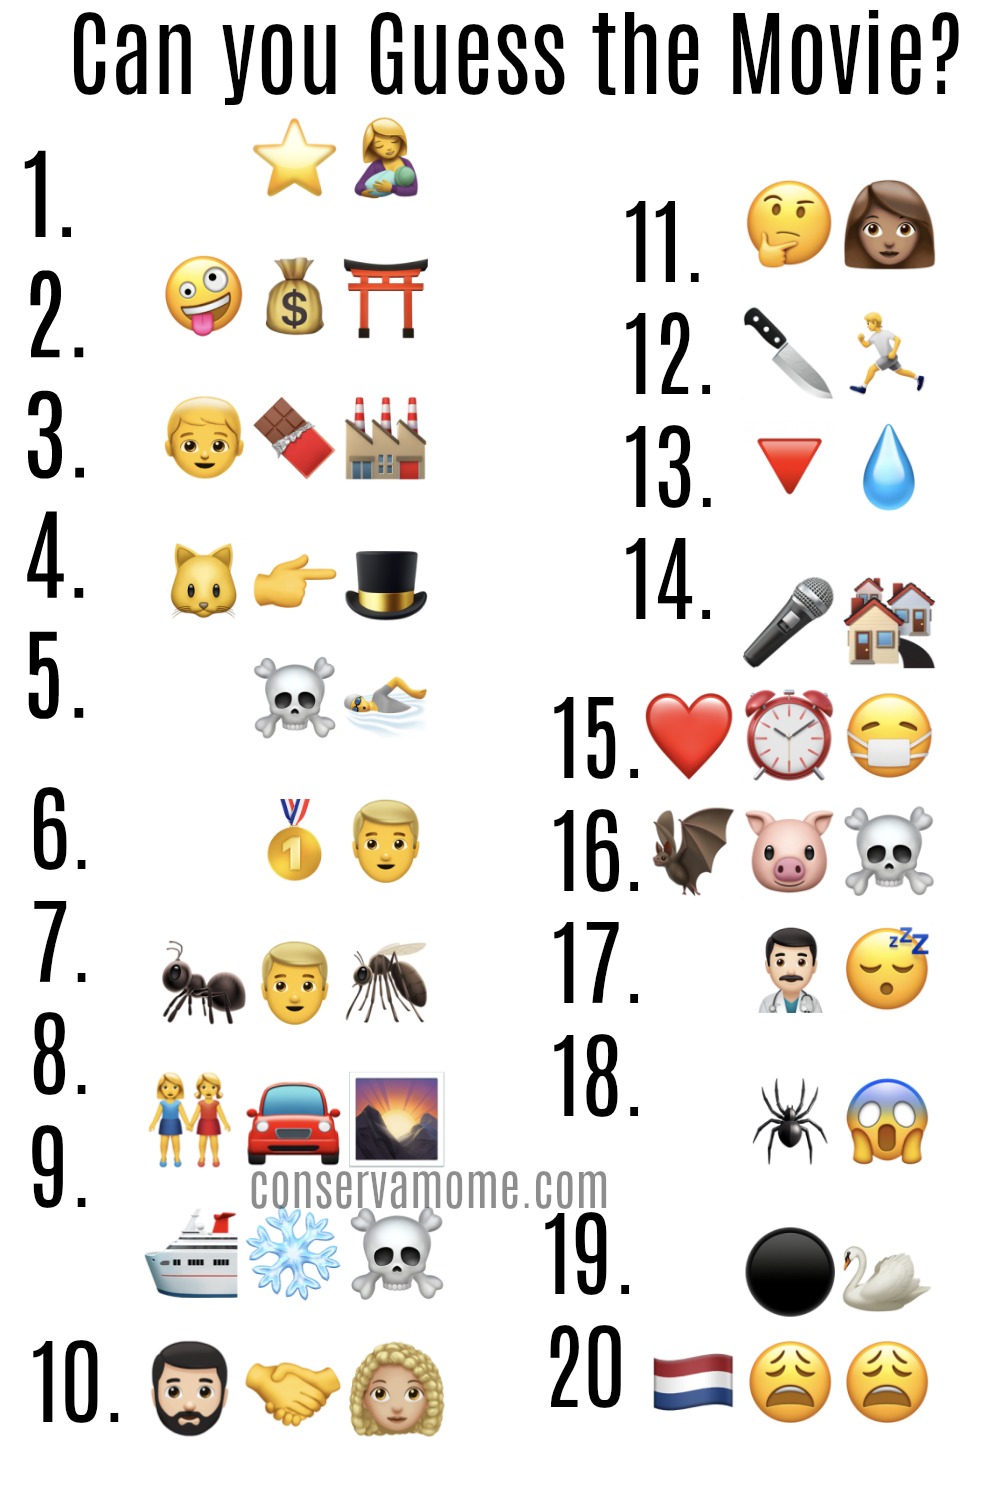 can you guess the movie using emojis?